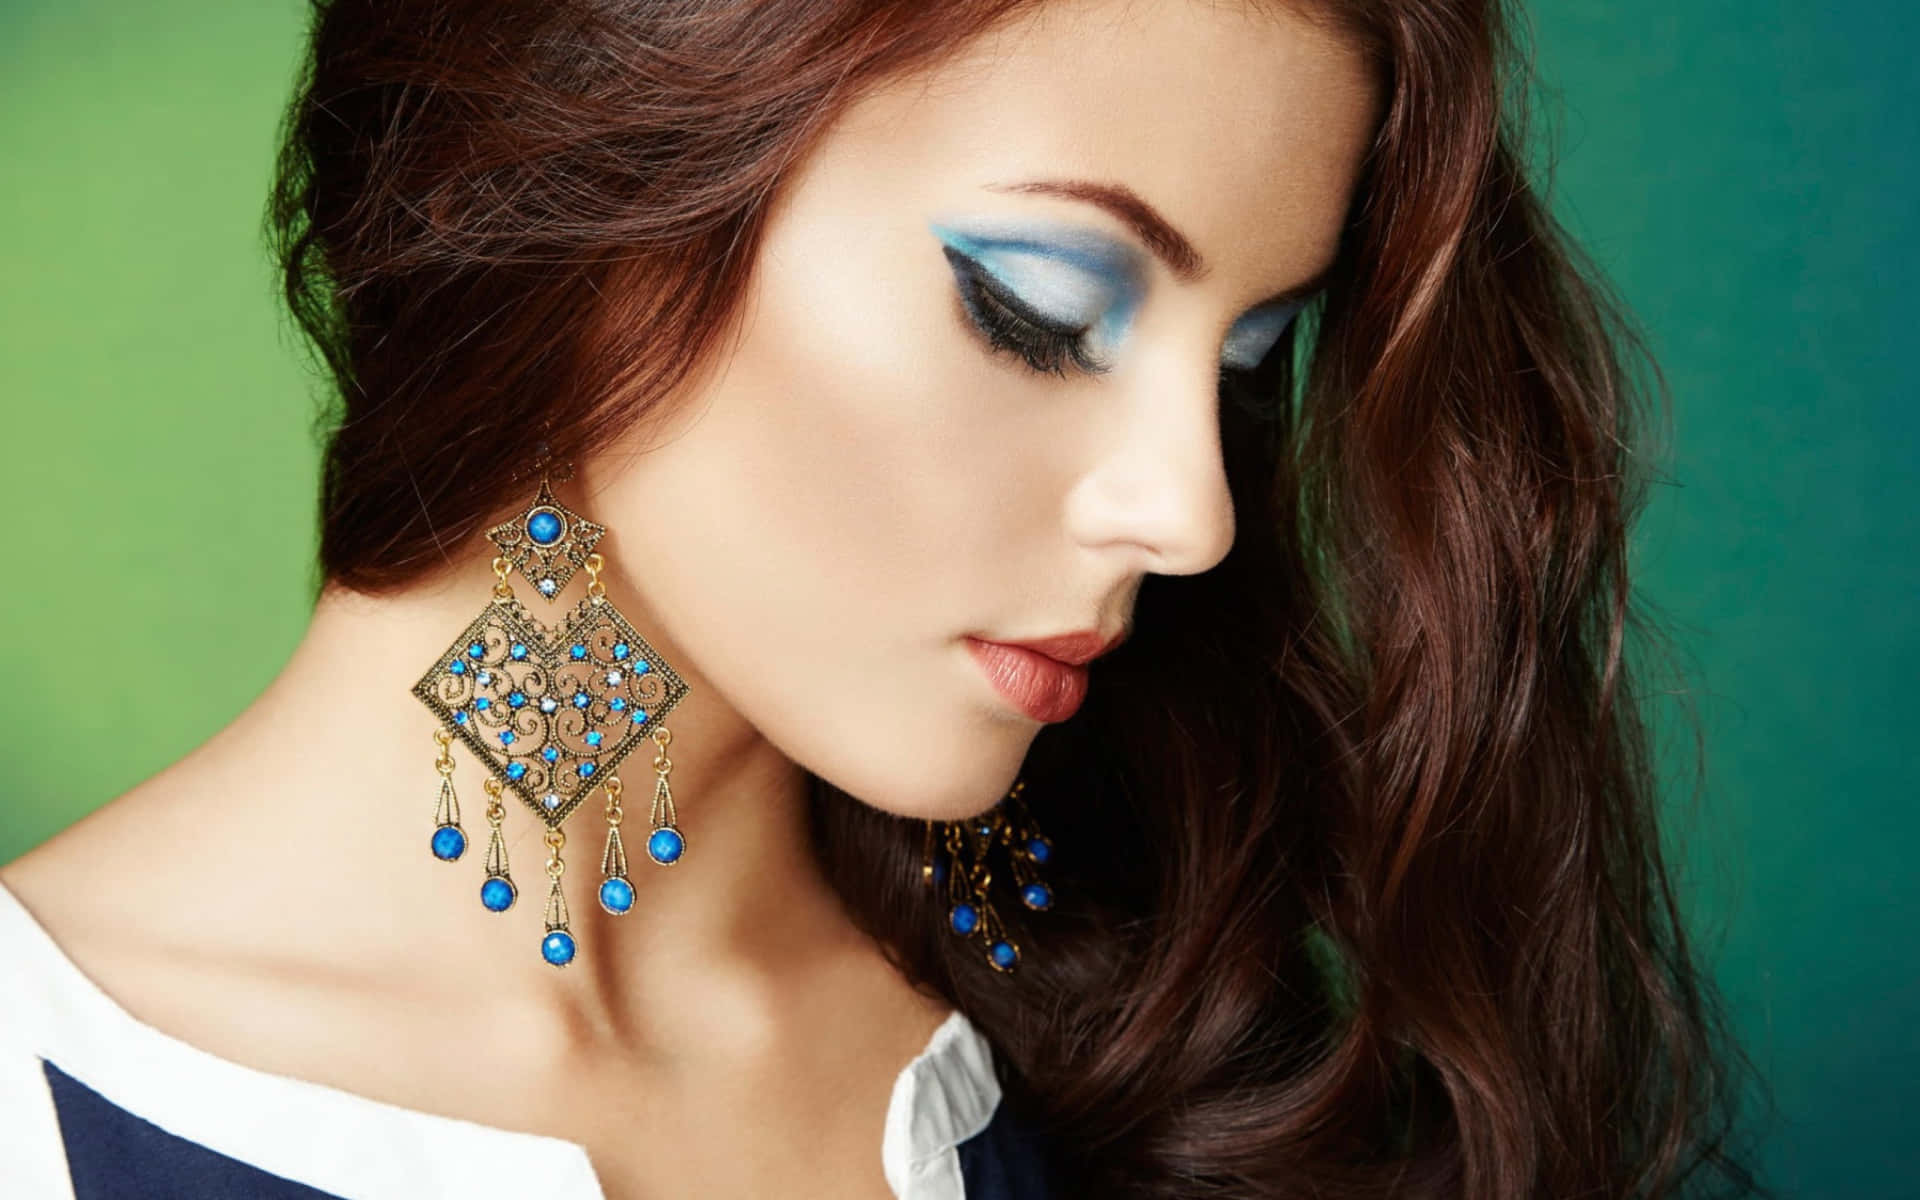 A Beautiful Woman With Blue Earrings And Blue Eye Makeup